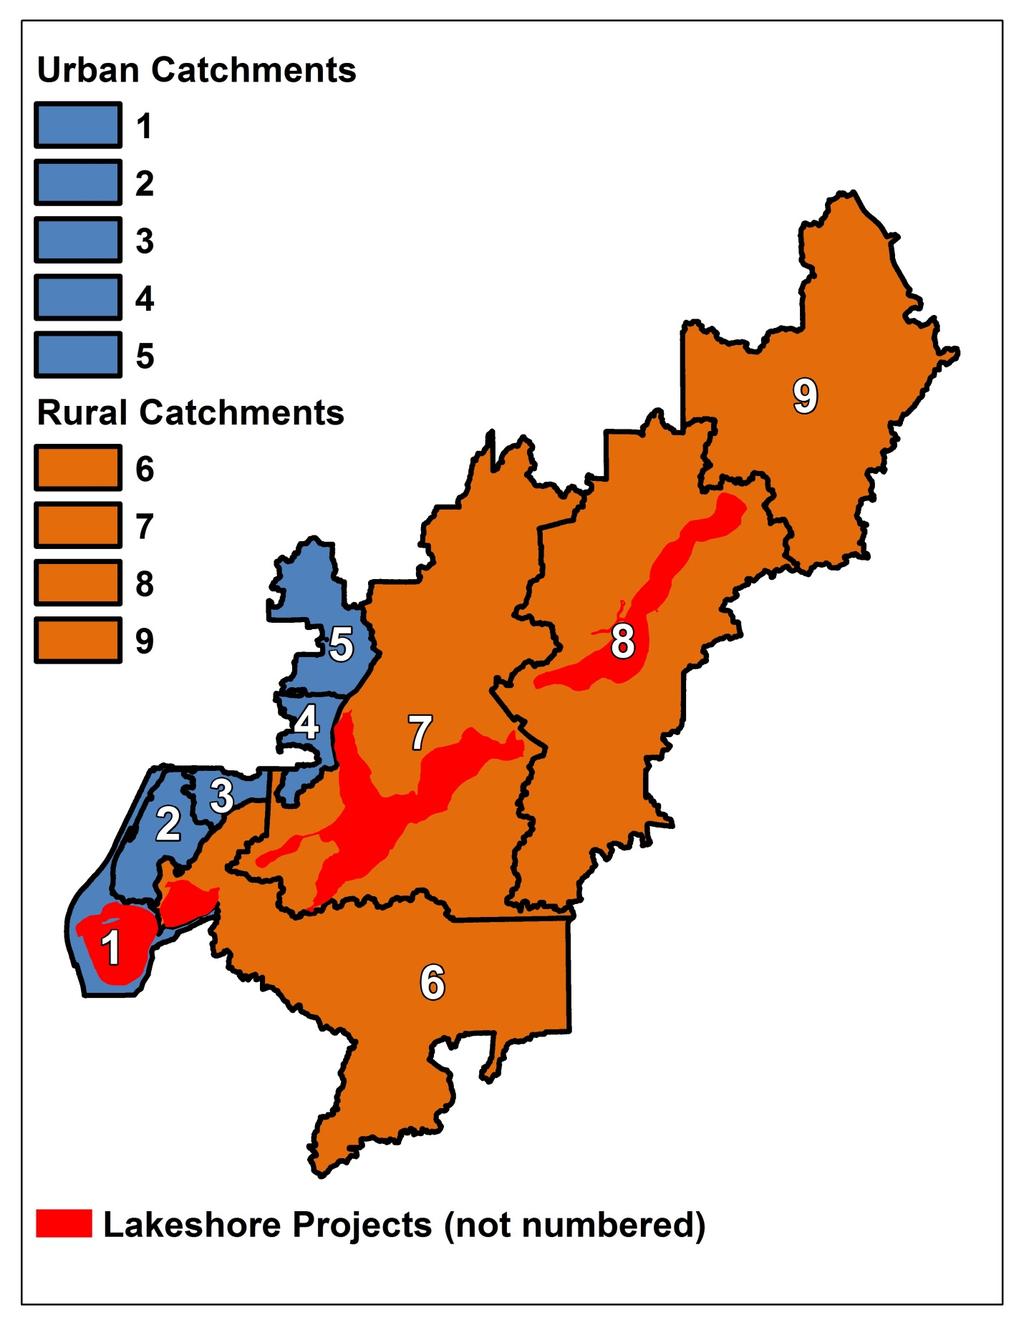 4 Executive Summary Figure 2: Areas in which projects were proposed, including urban catchments (1 5; colored blue), rural